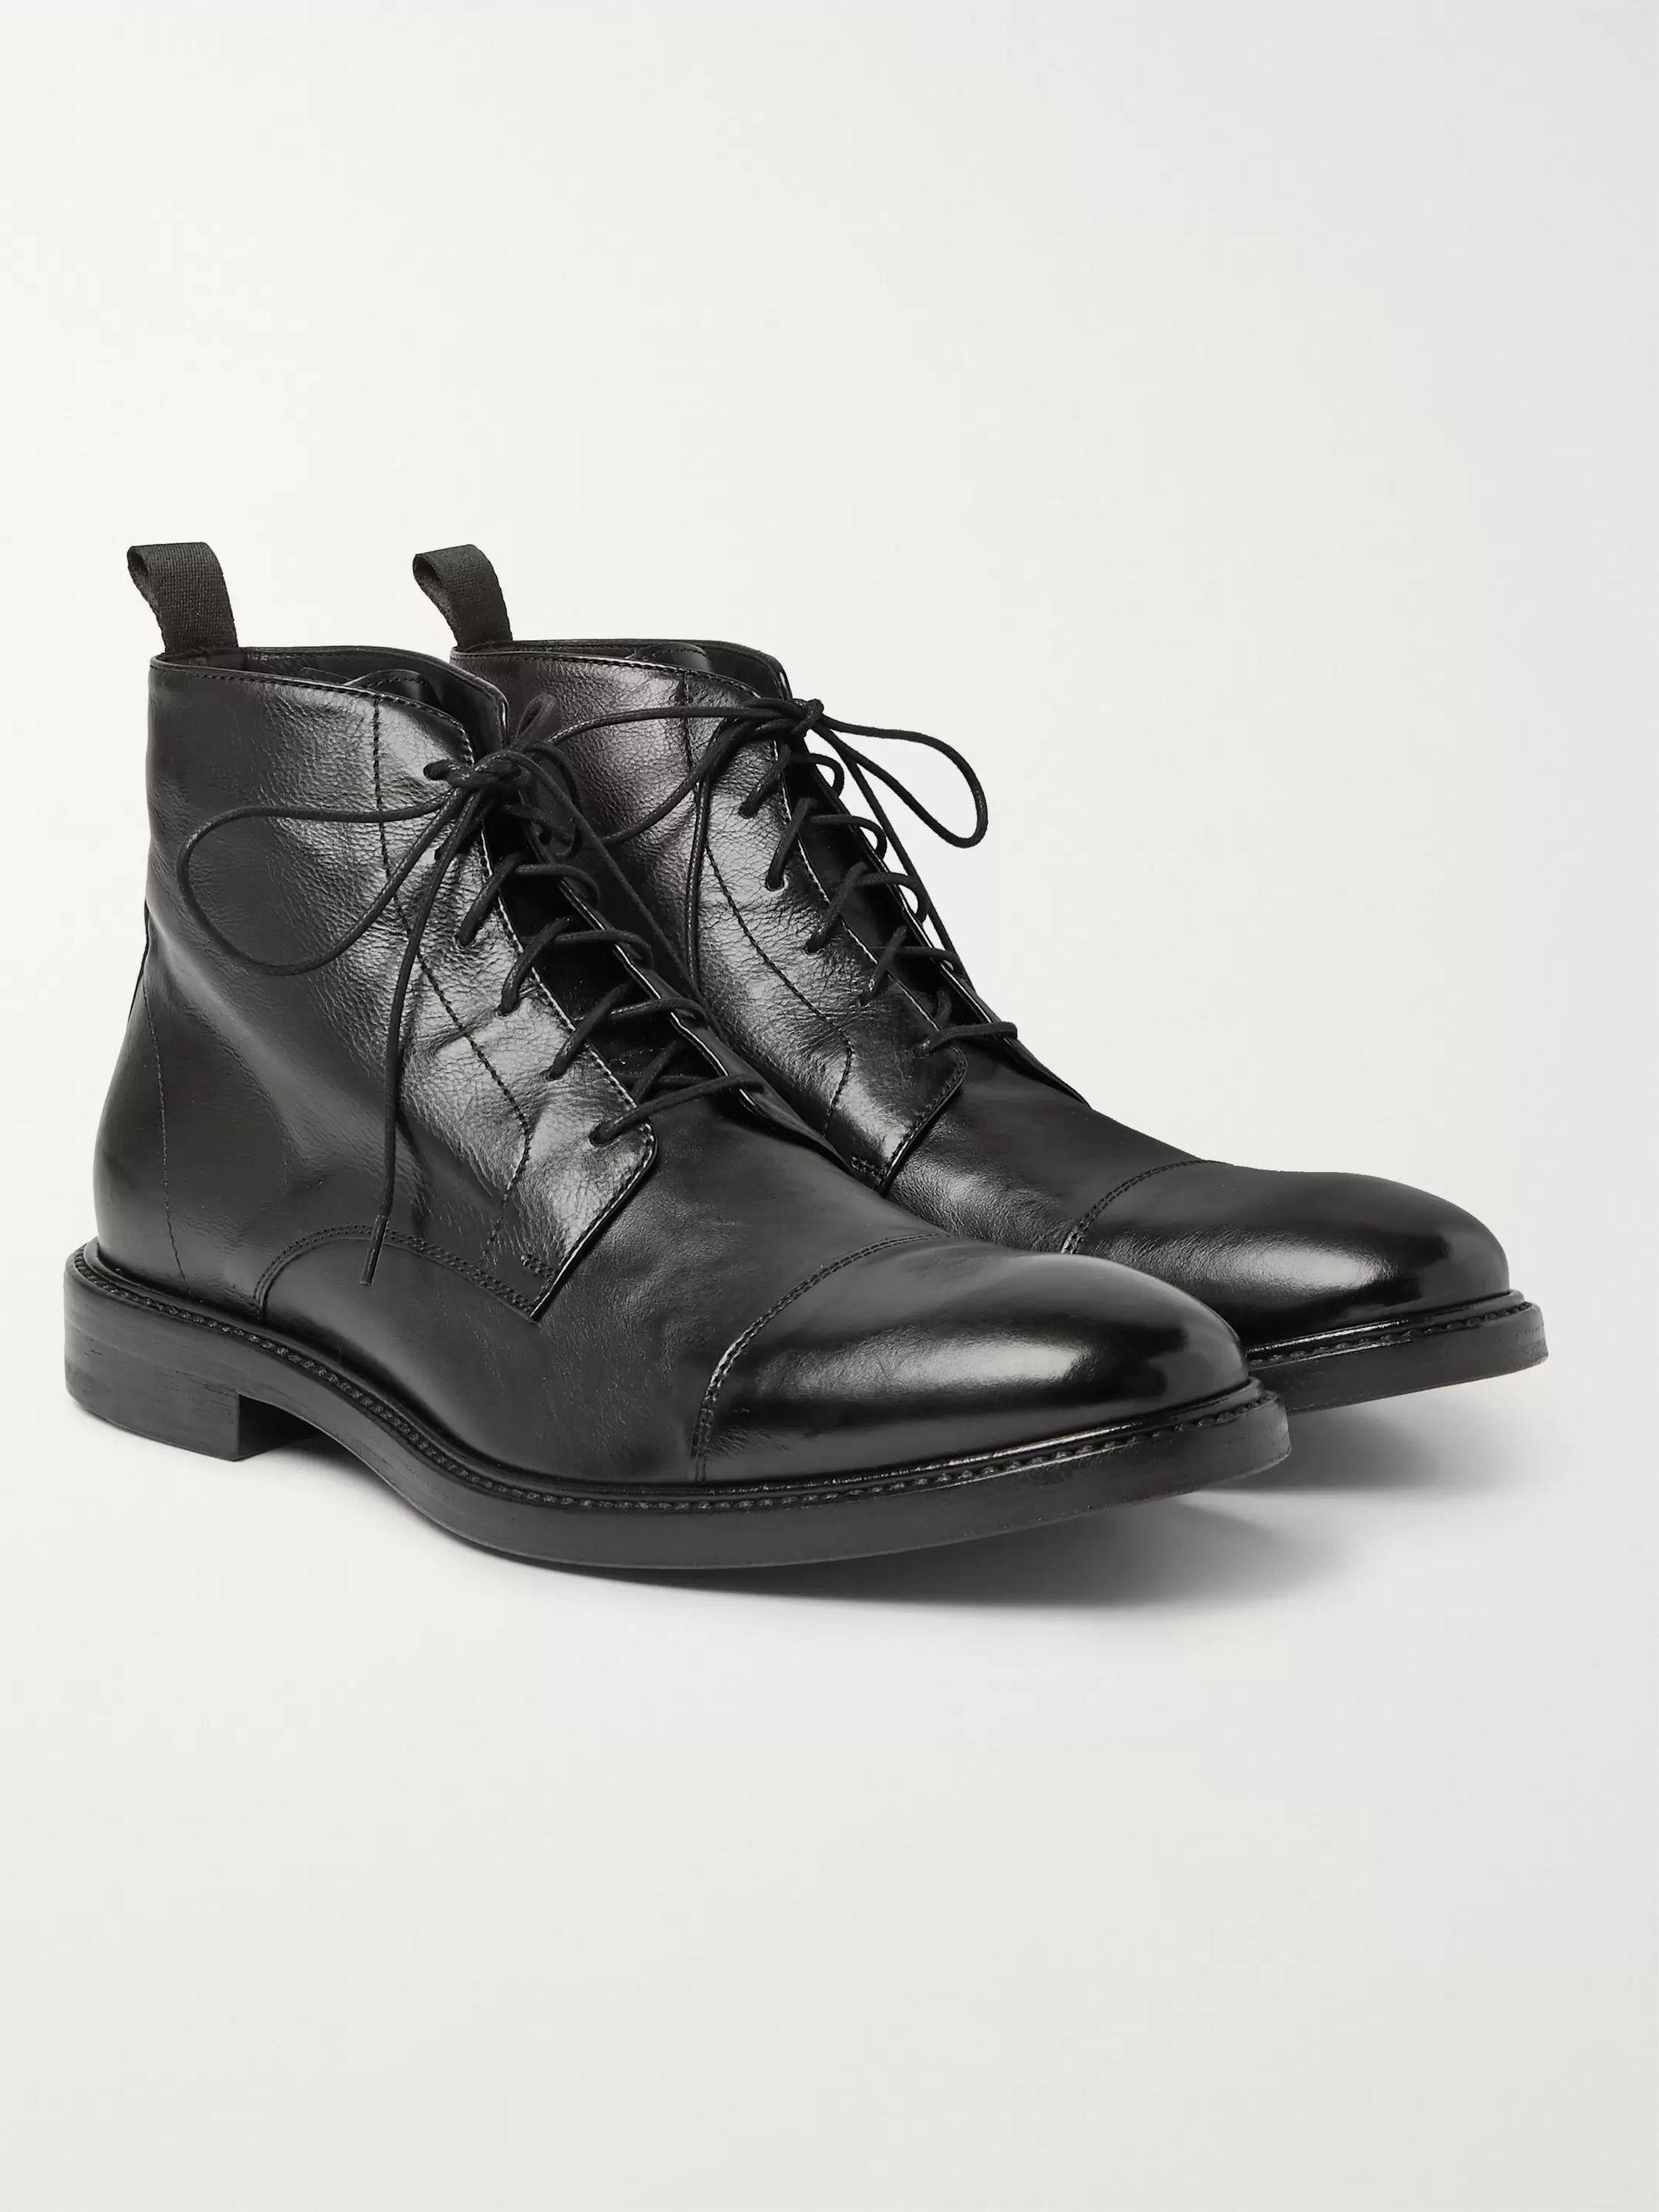 hiking boots that look like dress shoes